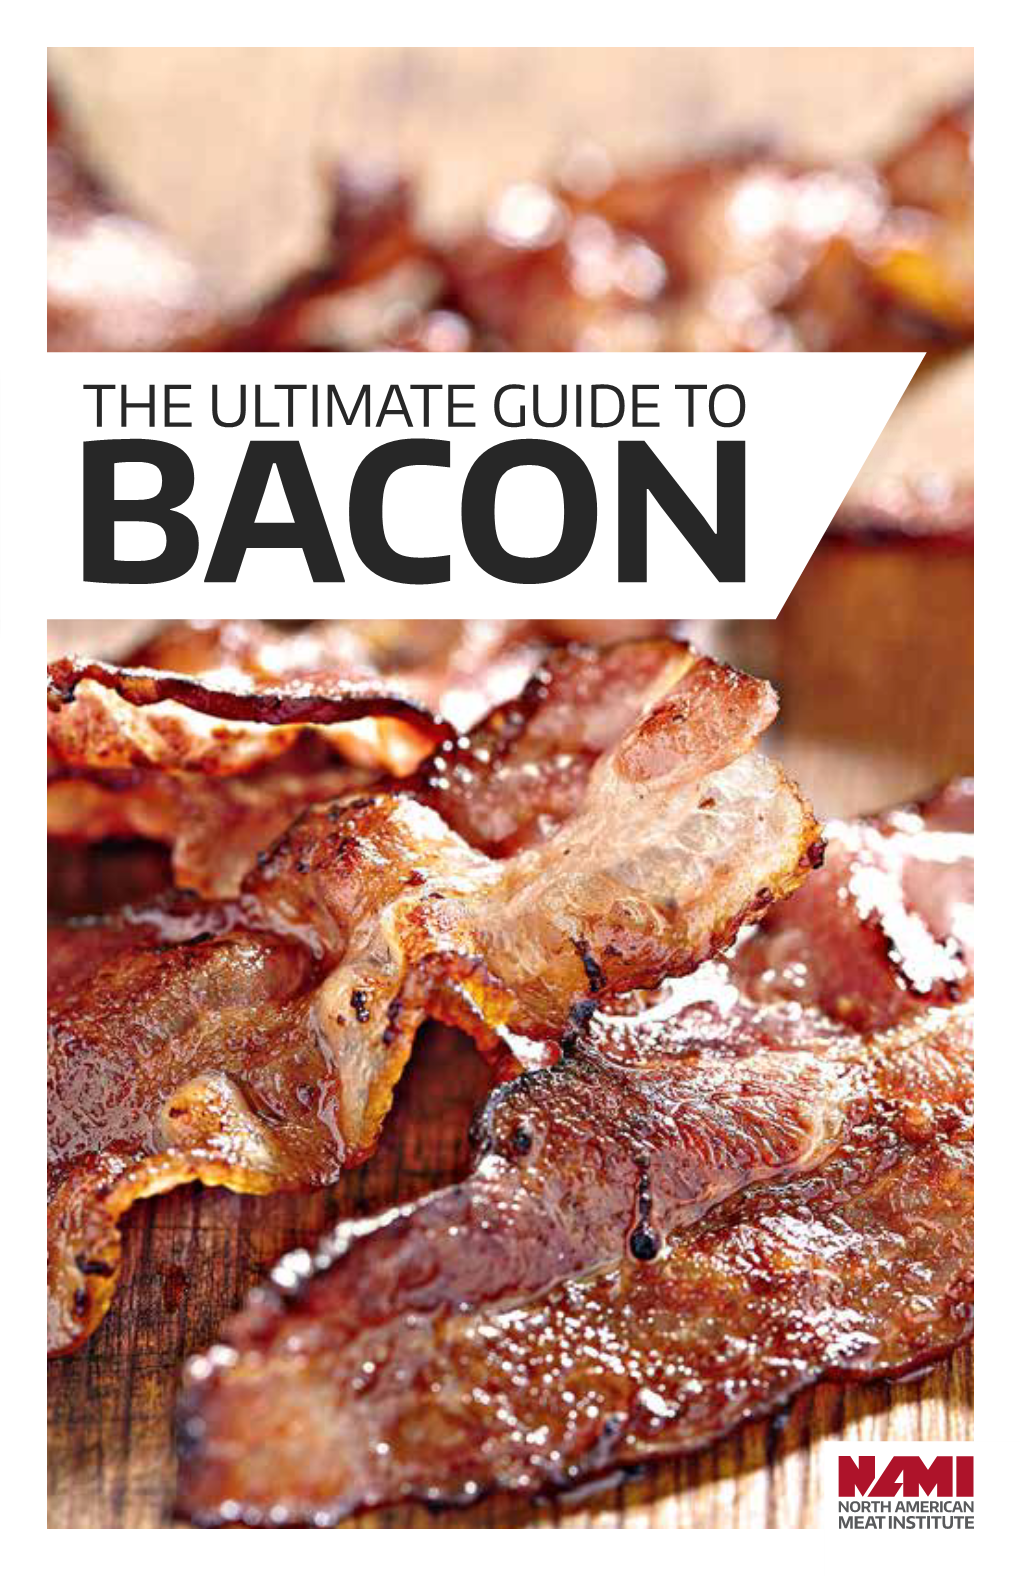 The Ultimate Guide to Bacon